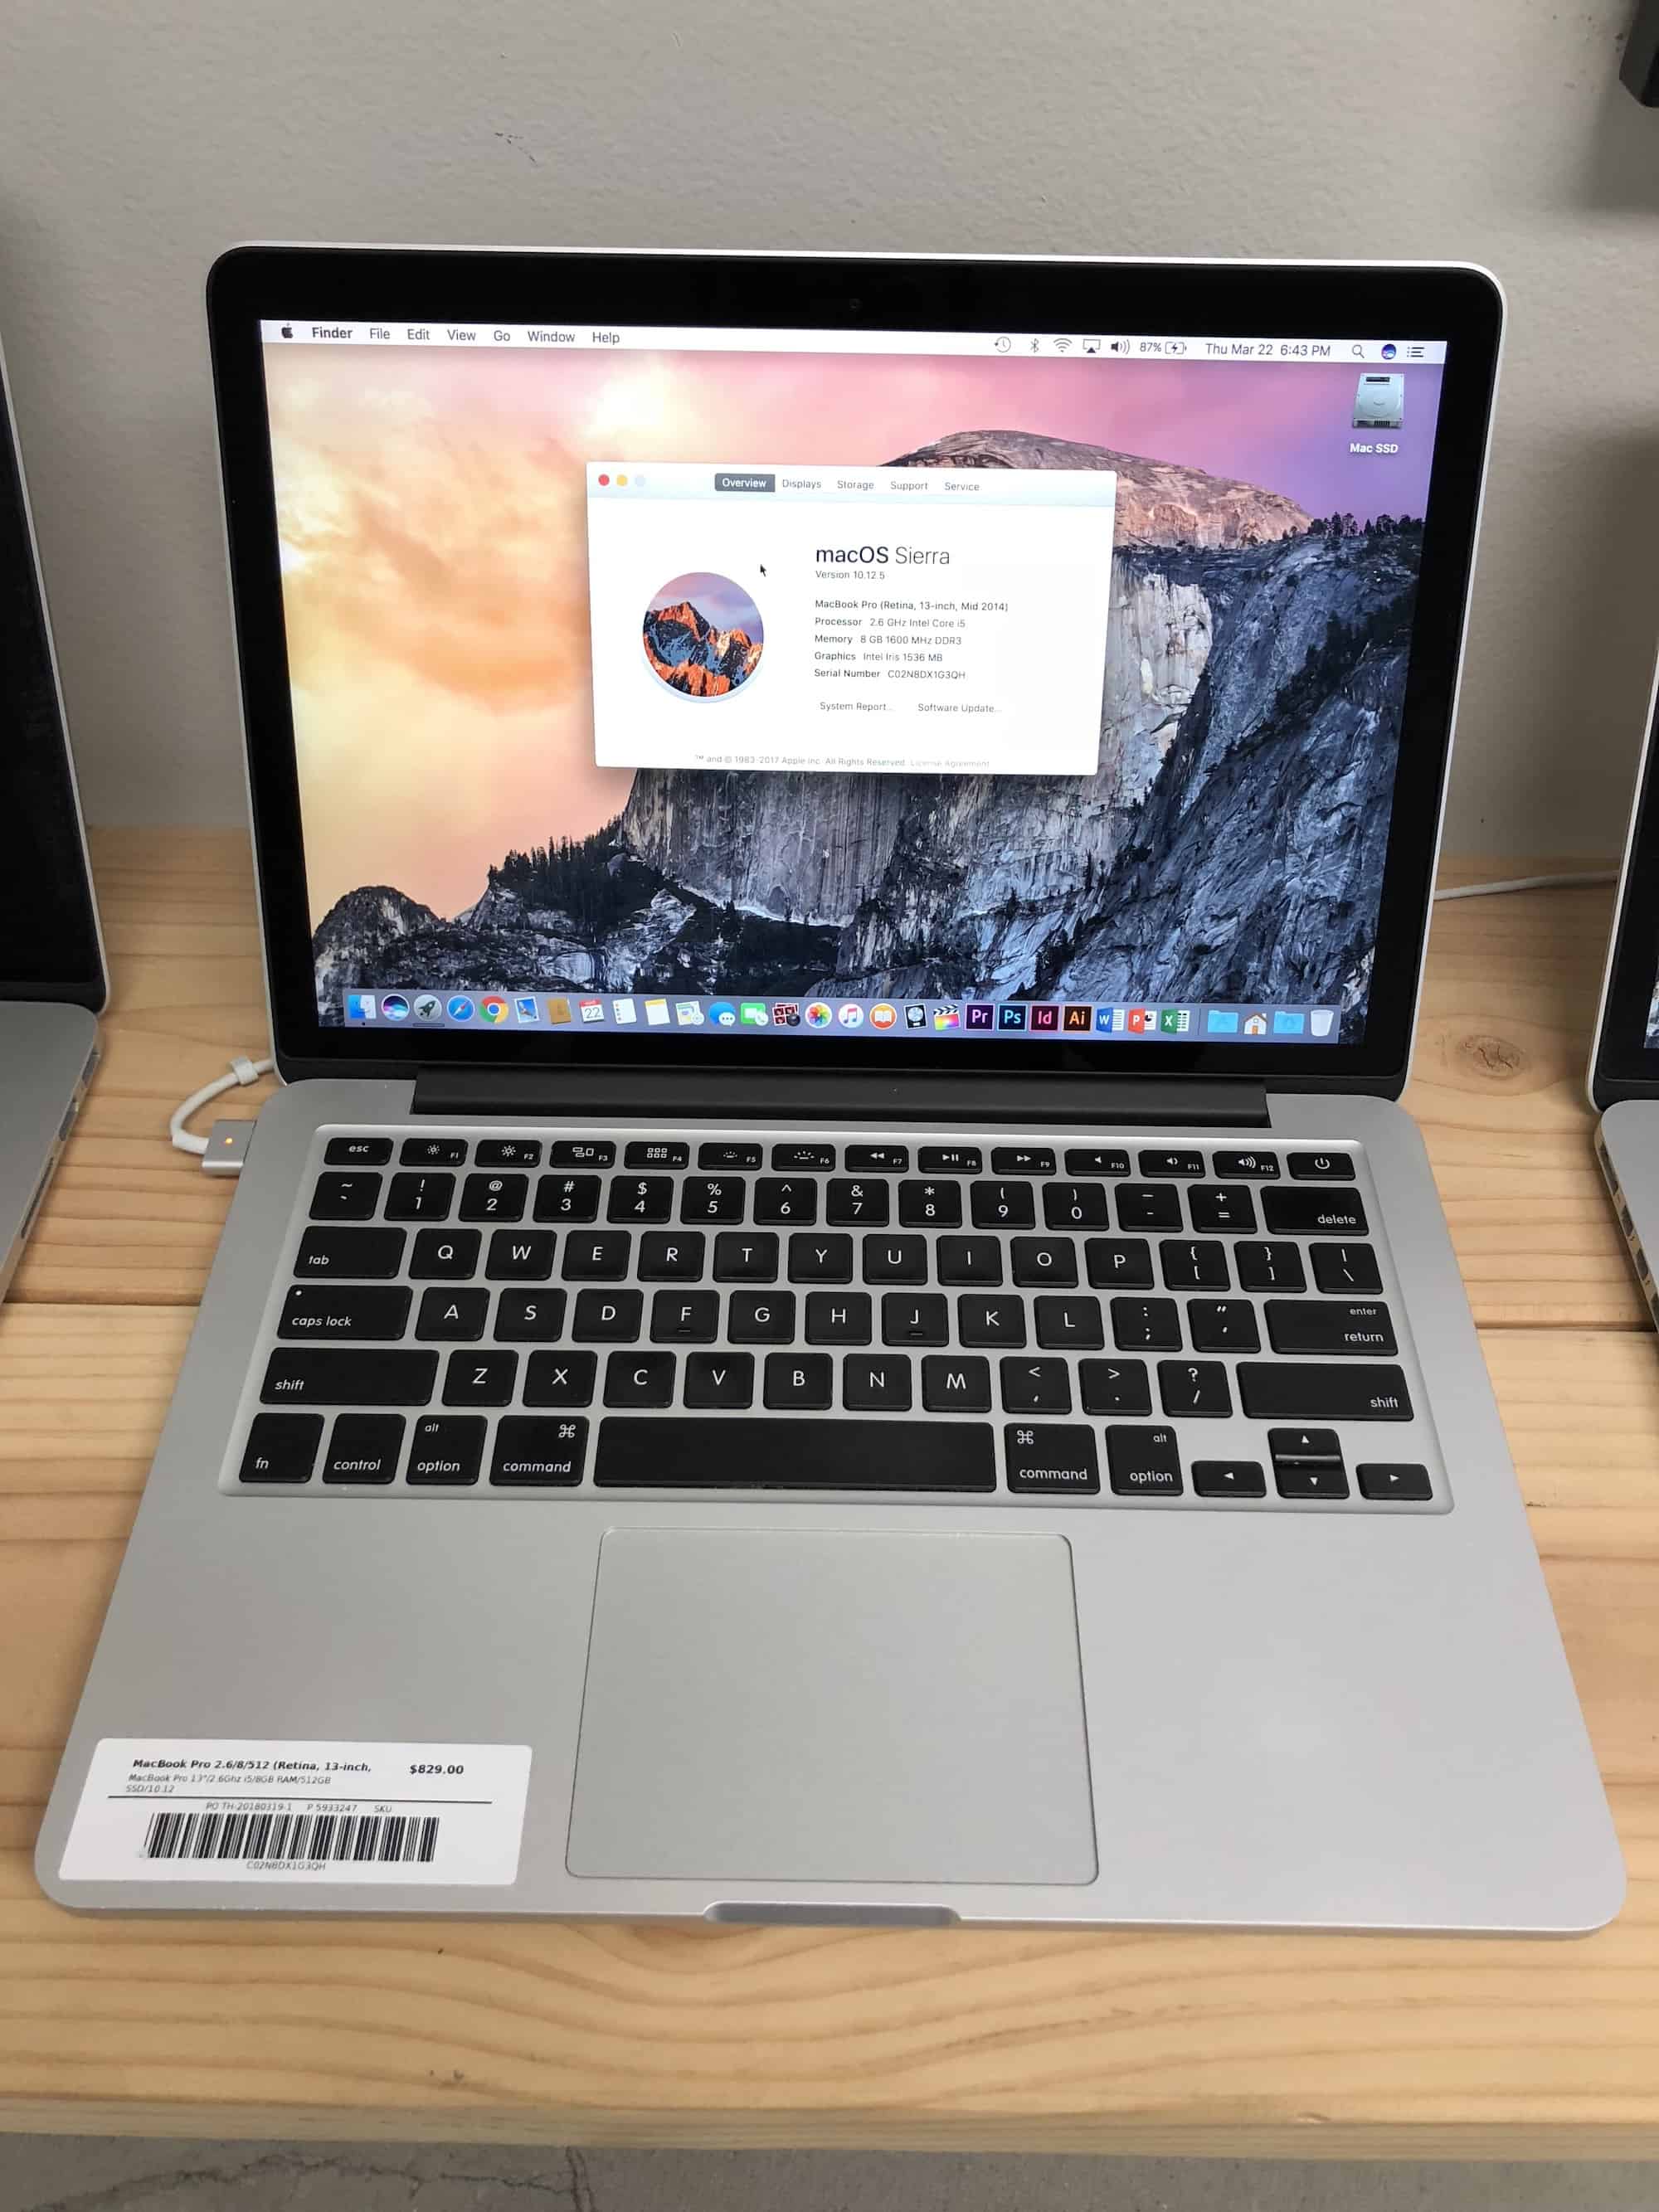 Used mac for sale bd